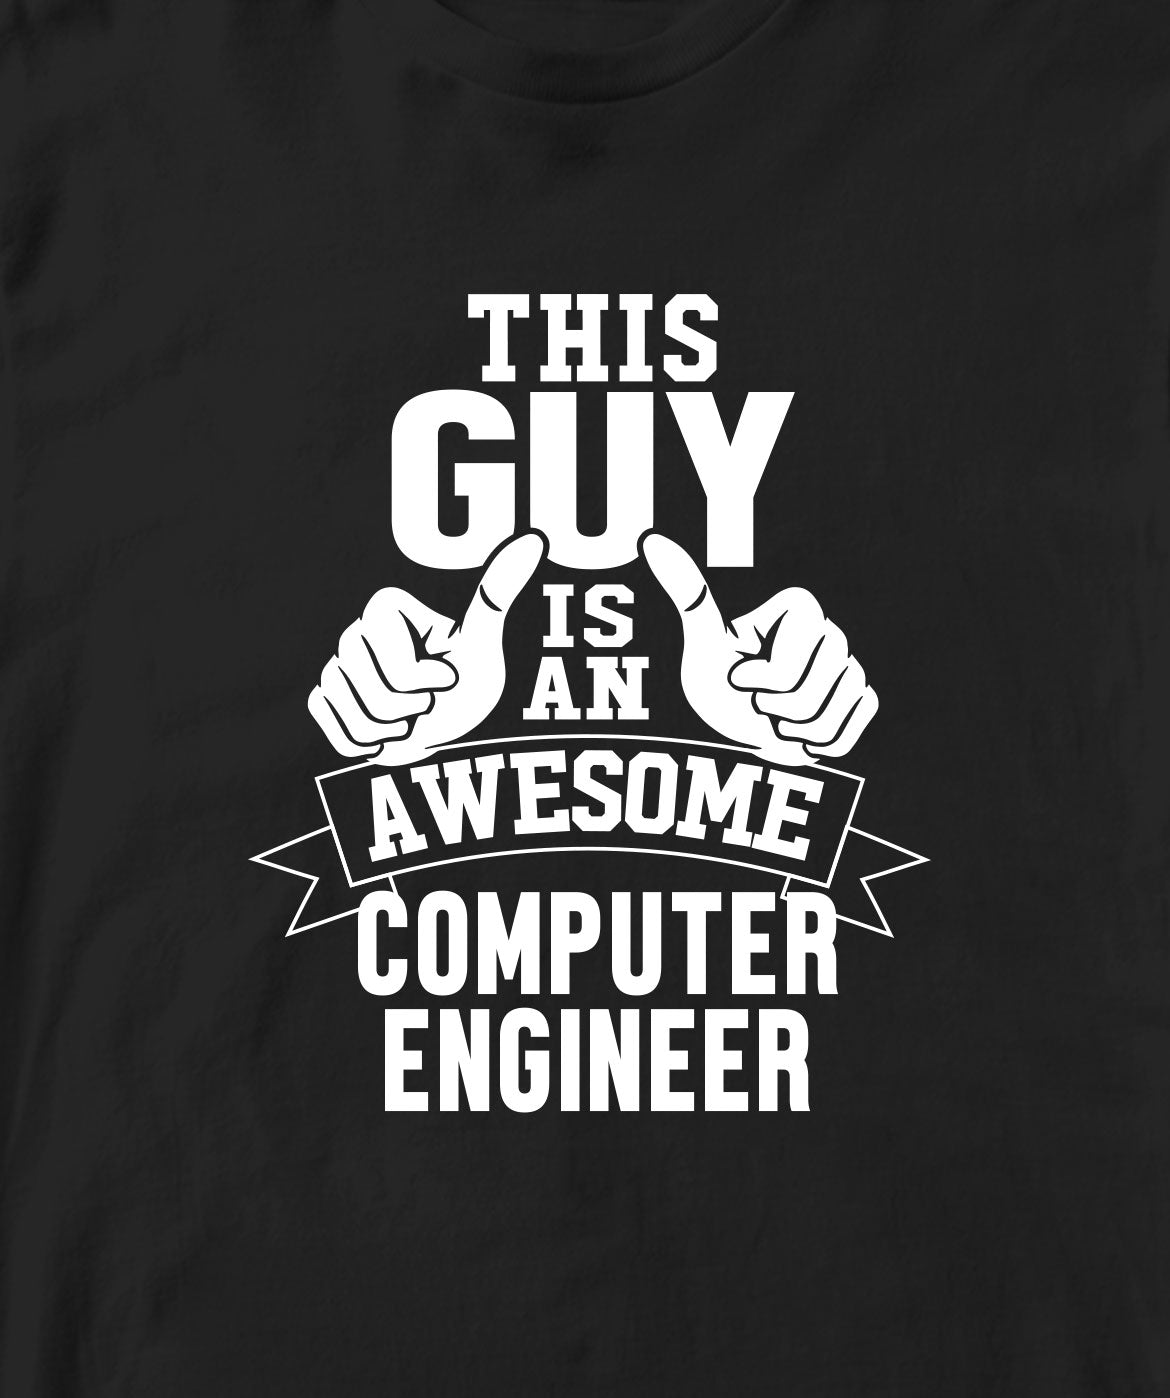 THIS GUY IS AN AWESOME COMPUTER ENGINEER TSHIRT